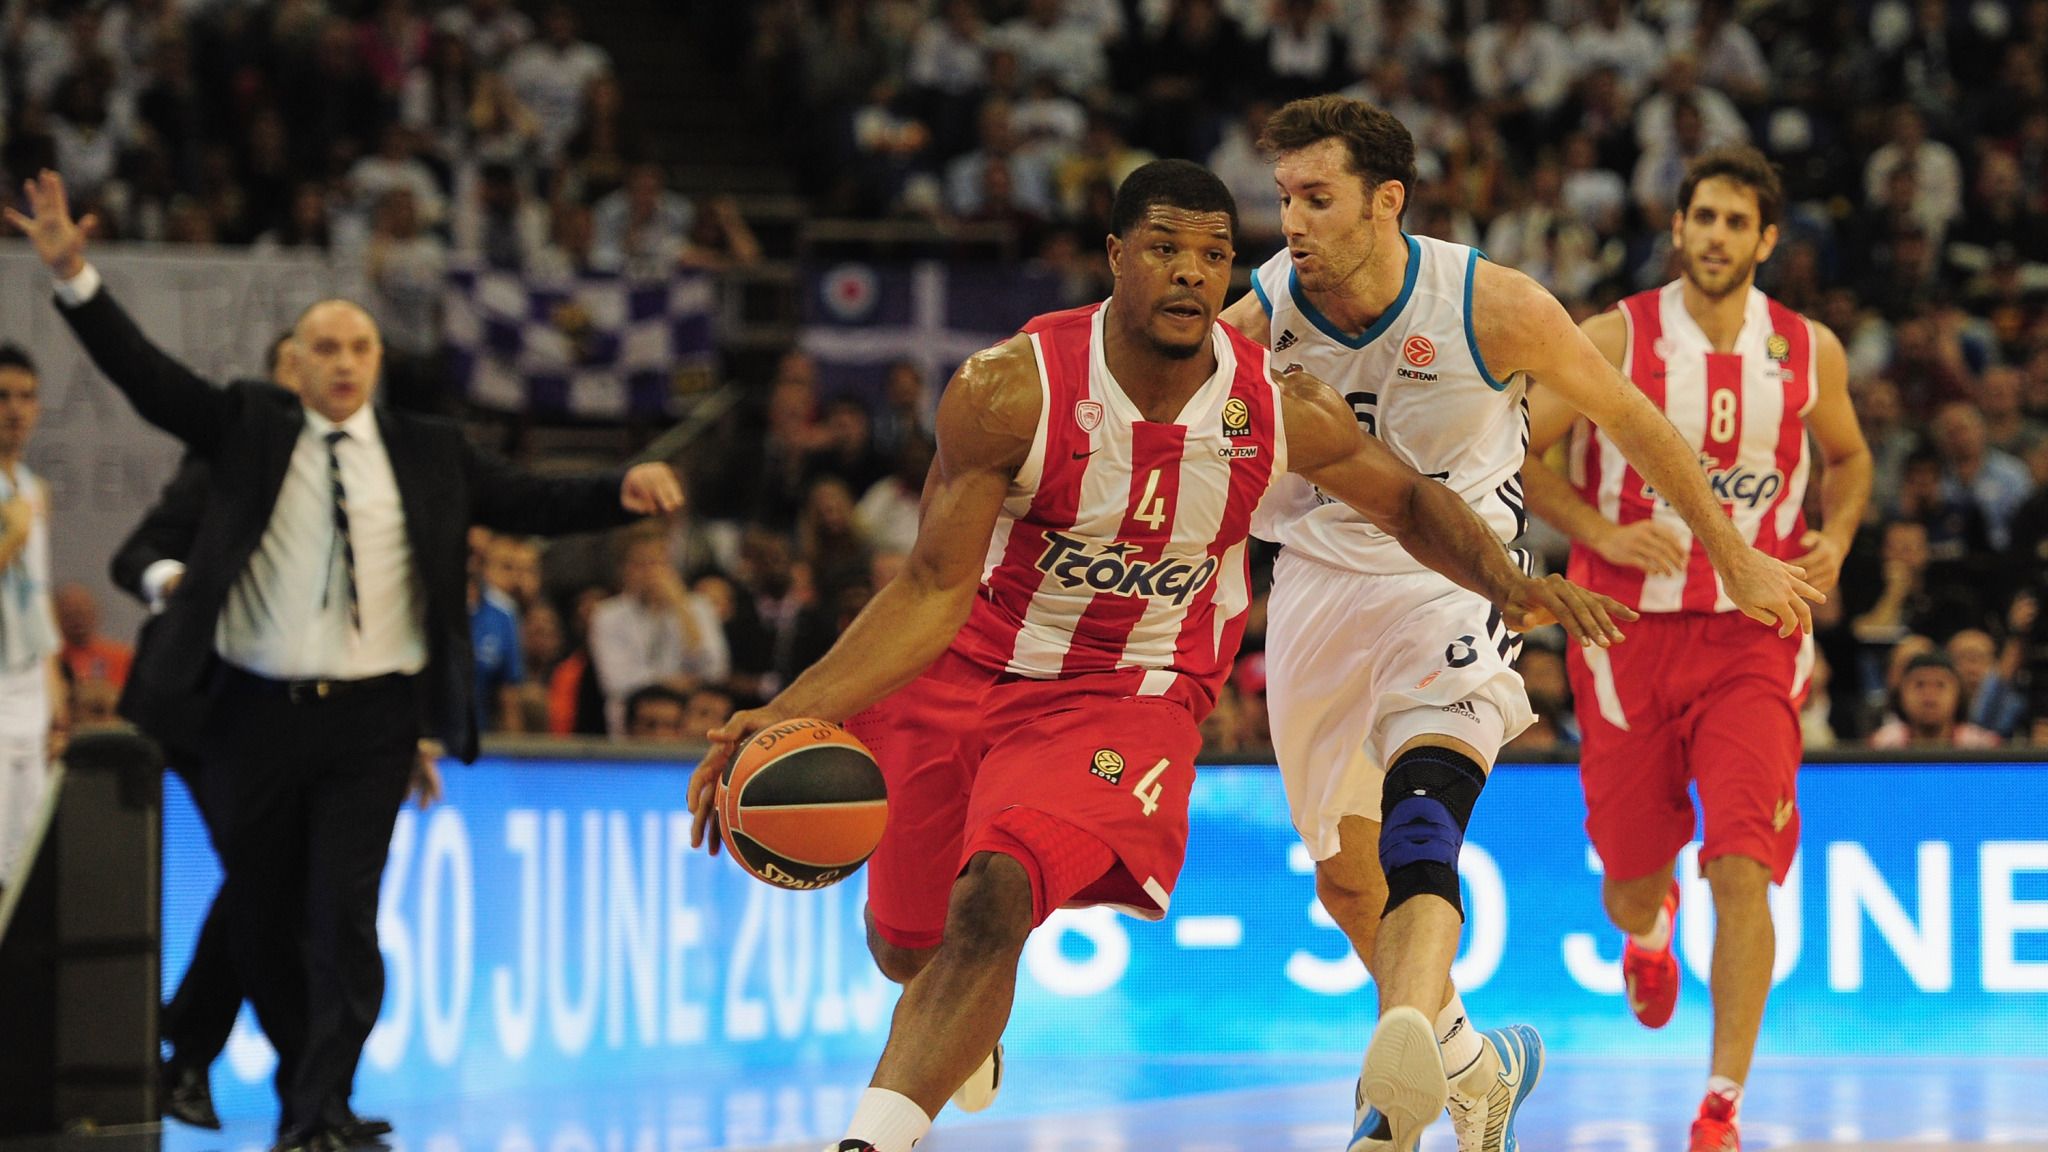 Euroleague Olympiacos Piraeus defeat Real Madrid to win second straight title Basketball News Sky Sports